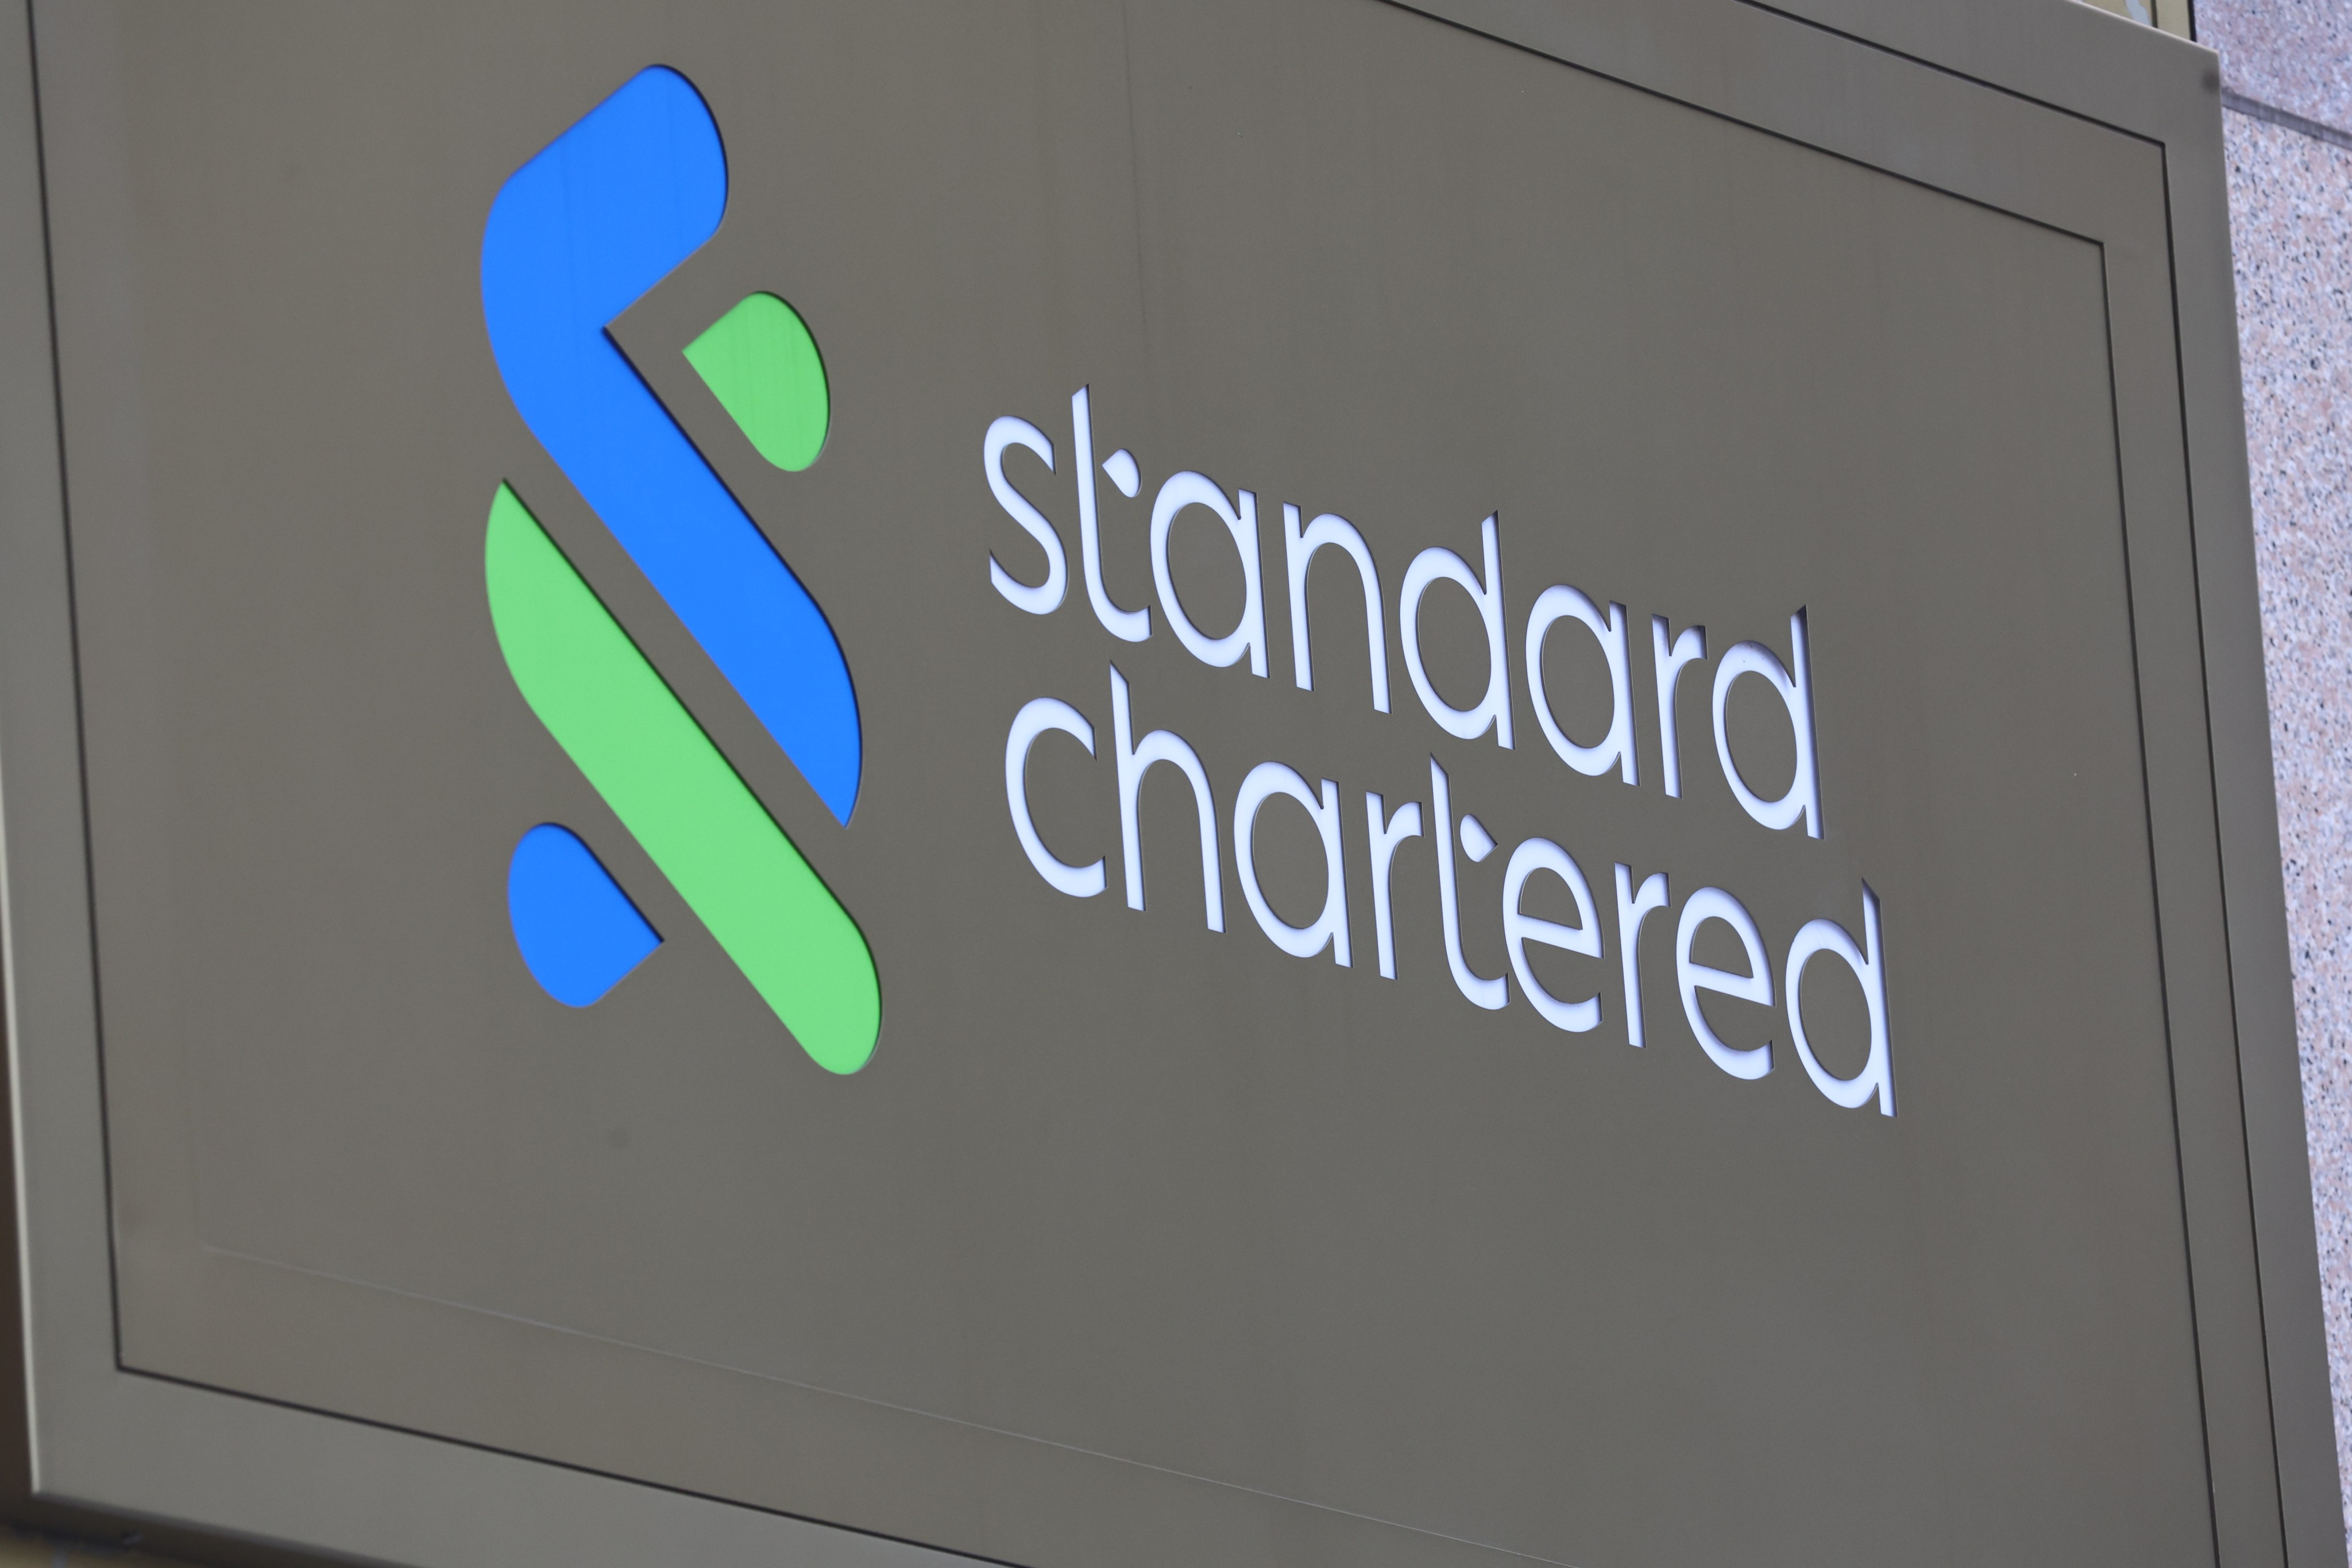 Standard Chartered’s operating income grew 8 per cent in Hong Kong, its largest market, to US$3.72 billion last year. Photo: Edmond So